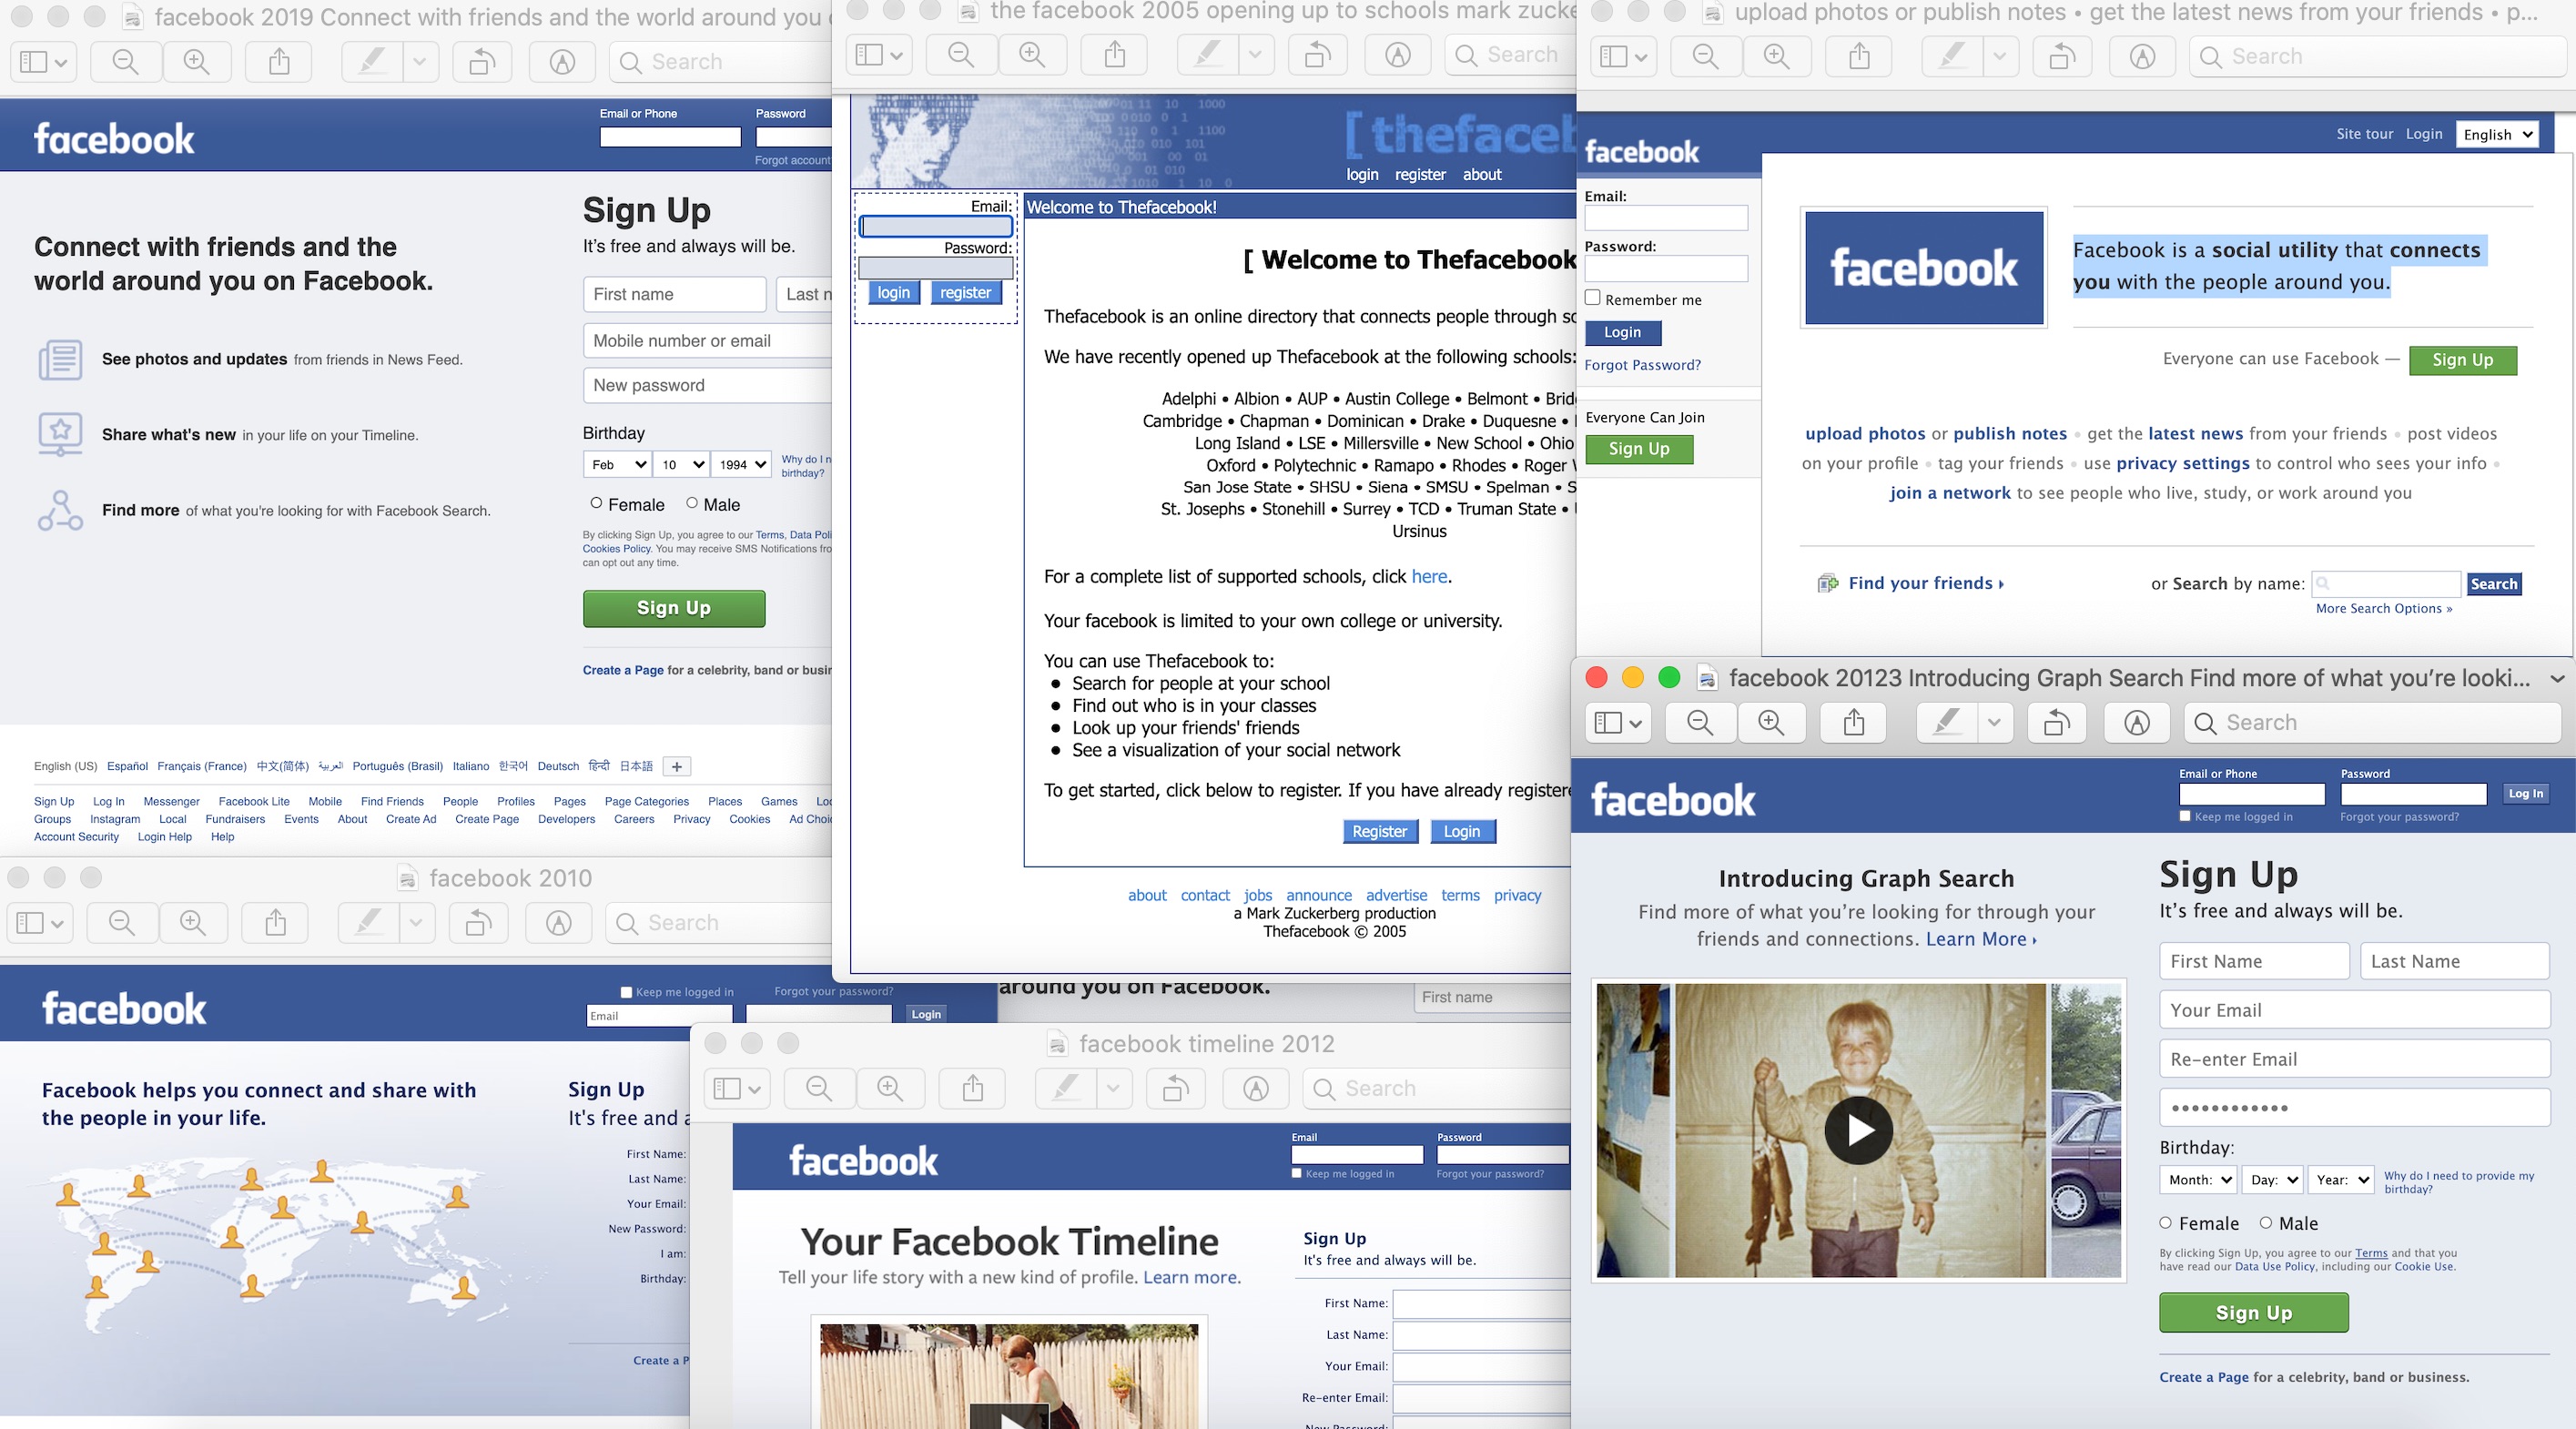 featured image - How Facebook Changed Their Homepage Every Year for the Last 17 Years